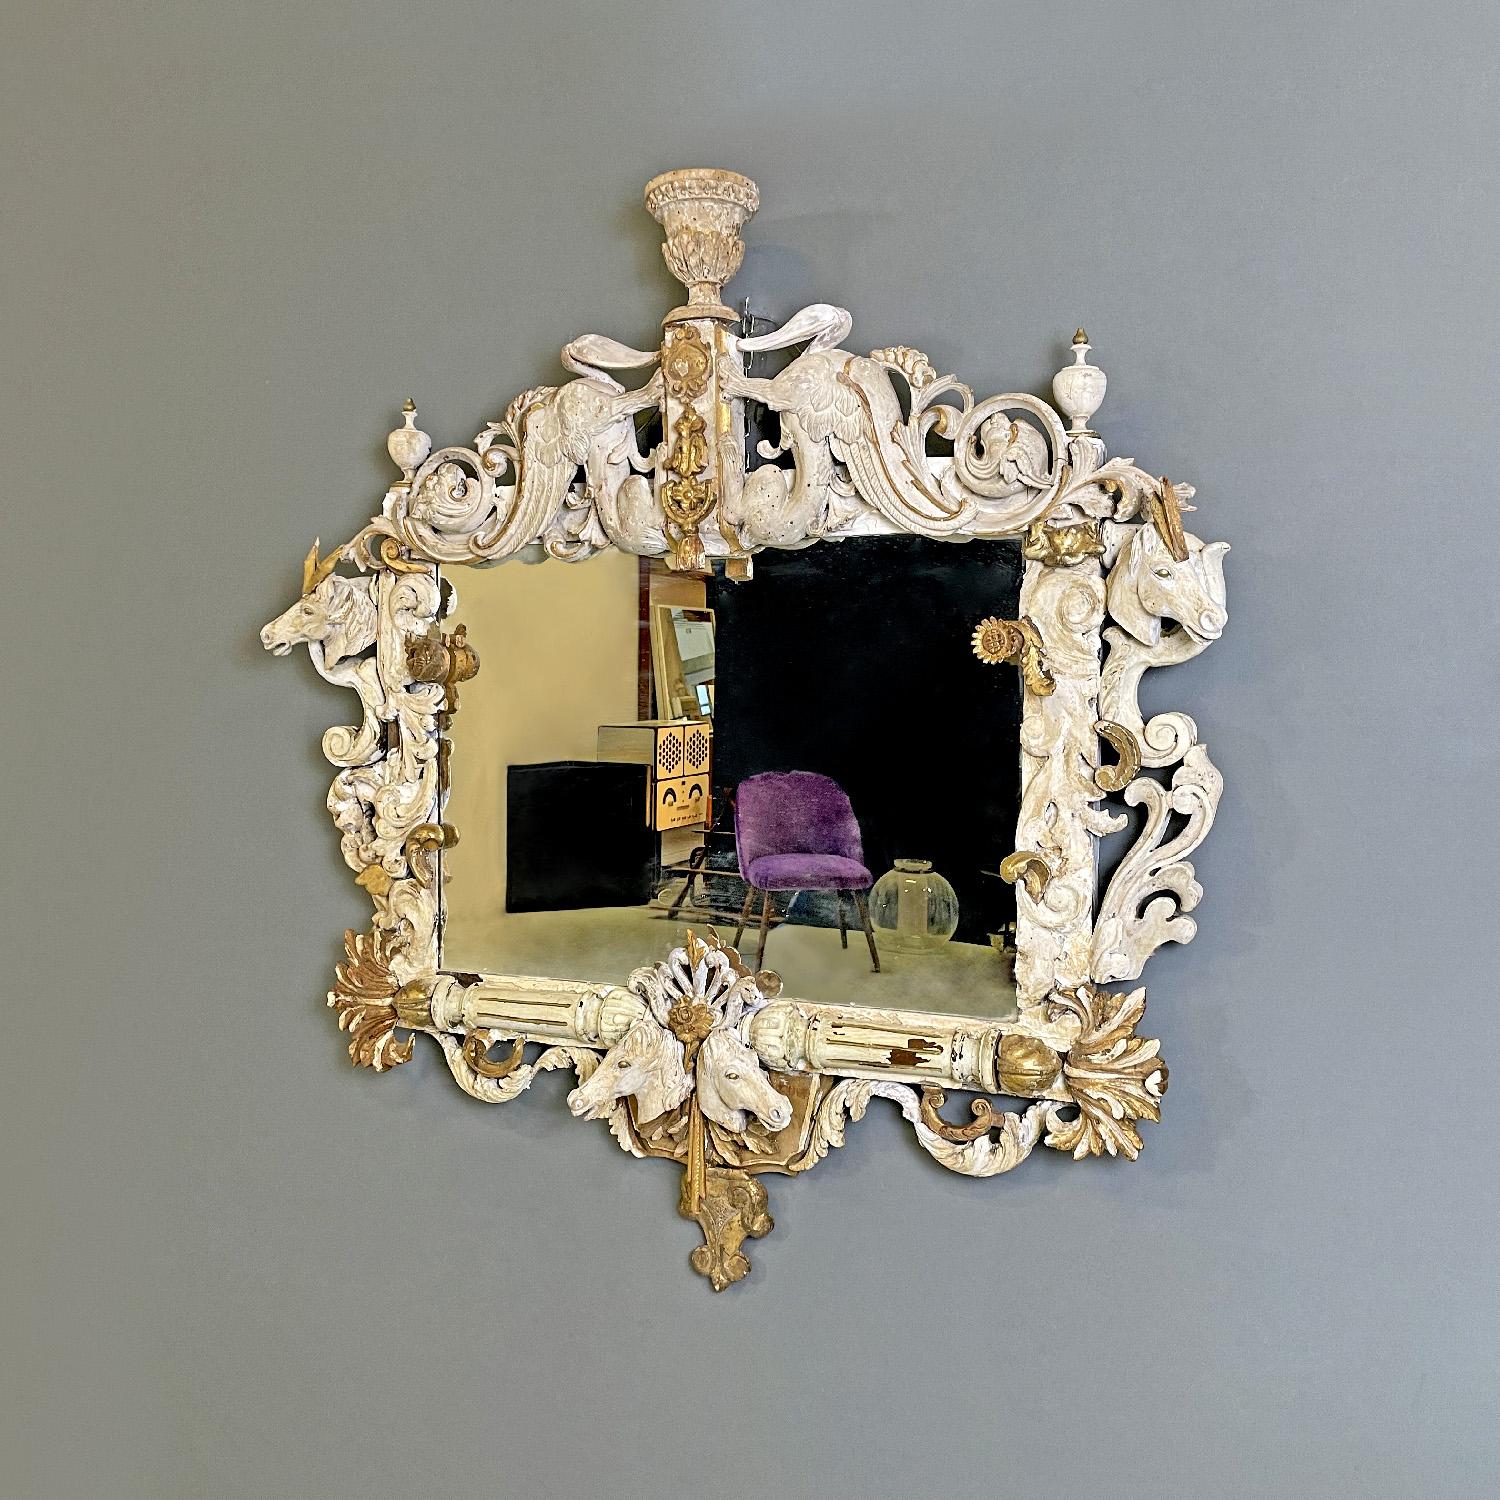 Italian antique white and golden wood wall mirror with animal decorations, 1990s
Rectangular wall mirror with finely decorated frame. The relief decorations recall the vegetal world, such as acanthus flowers and leaves, and animals, in the lower